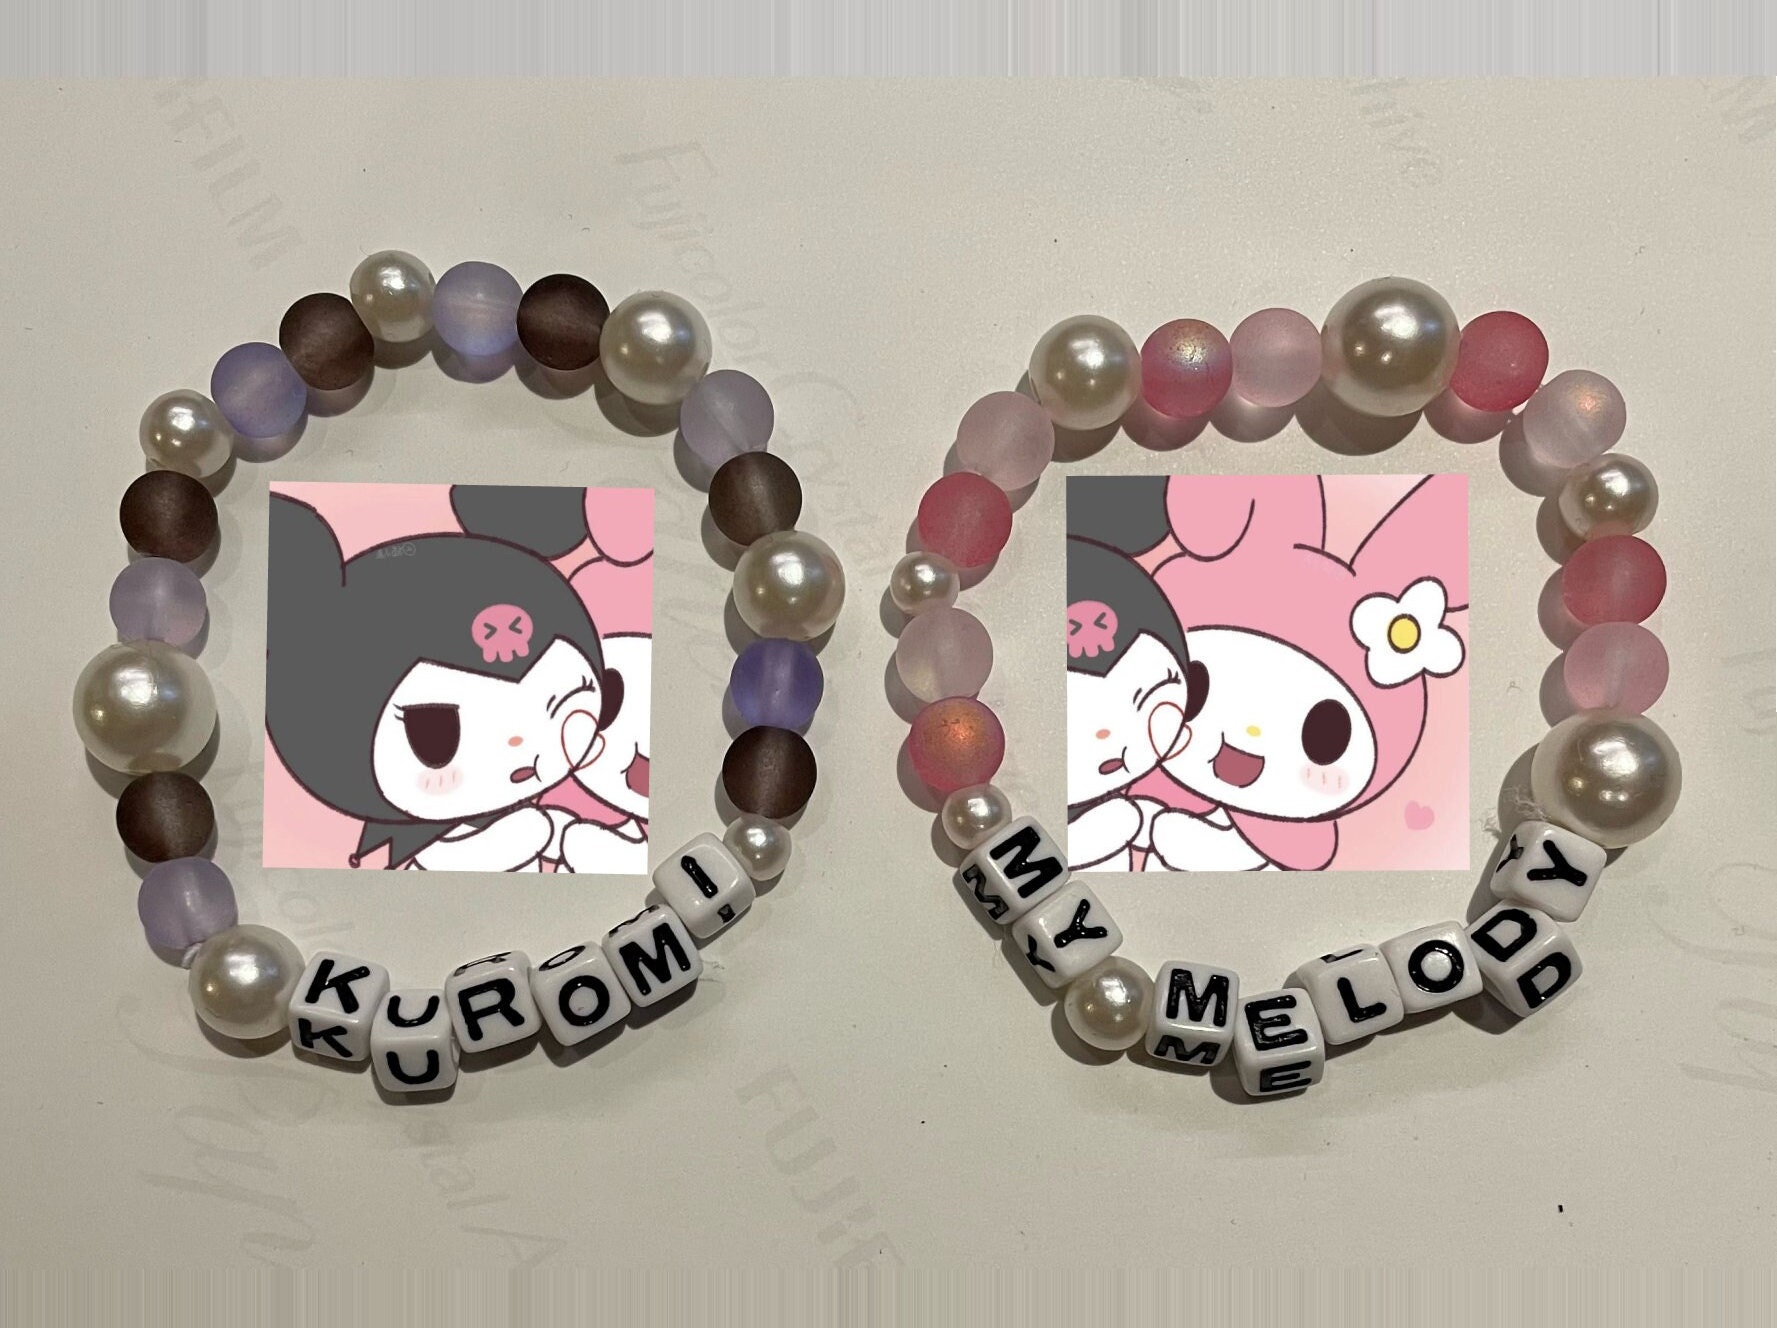 Hello Kitty Sanrio Girls Cord Bracelet 3-Piece Set with Kuromi, My Melody  Charms, Officially Licensed